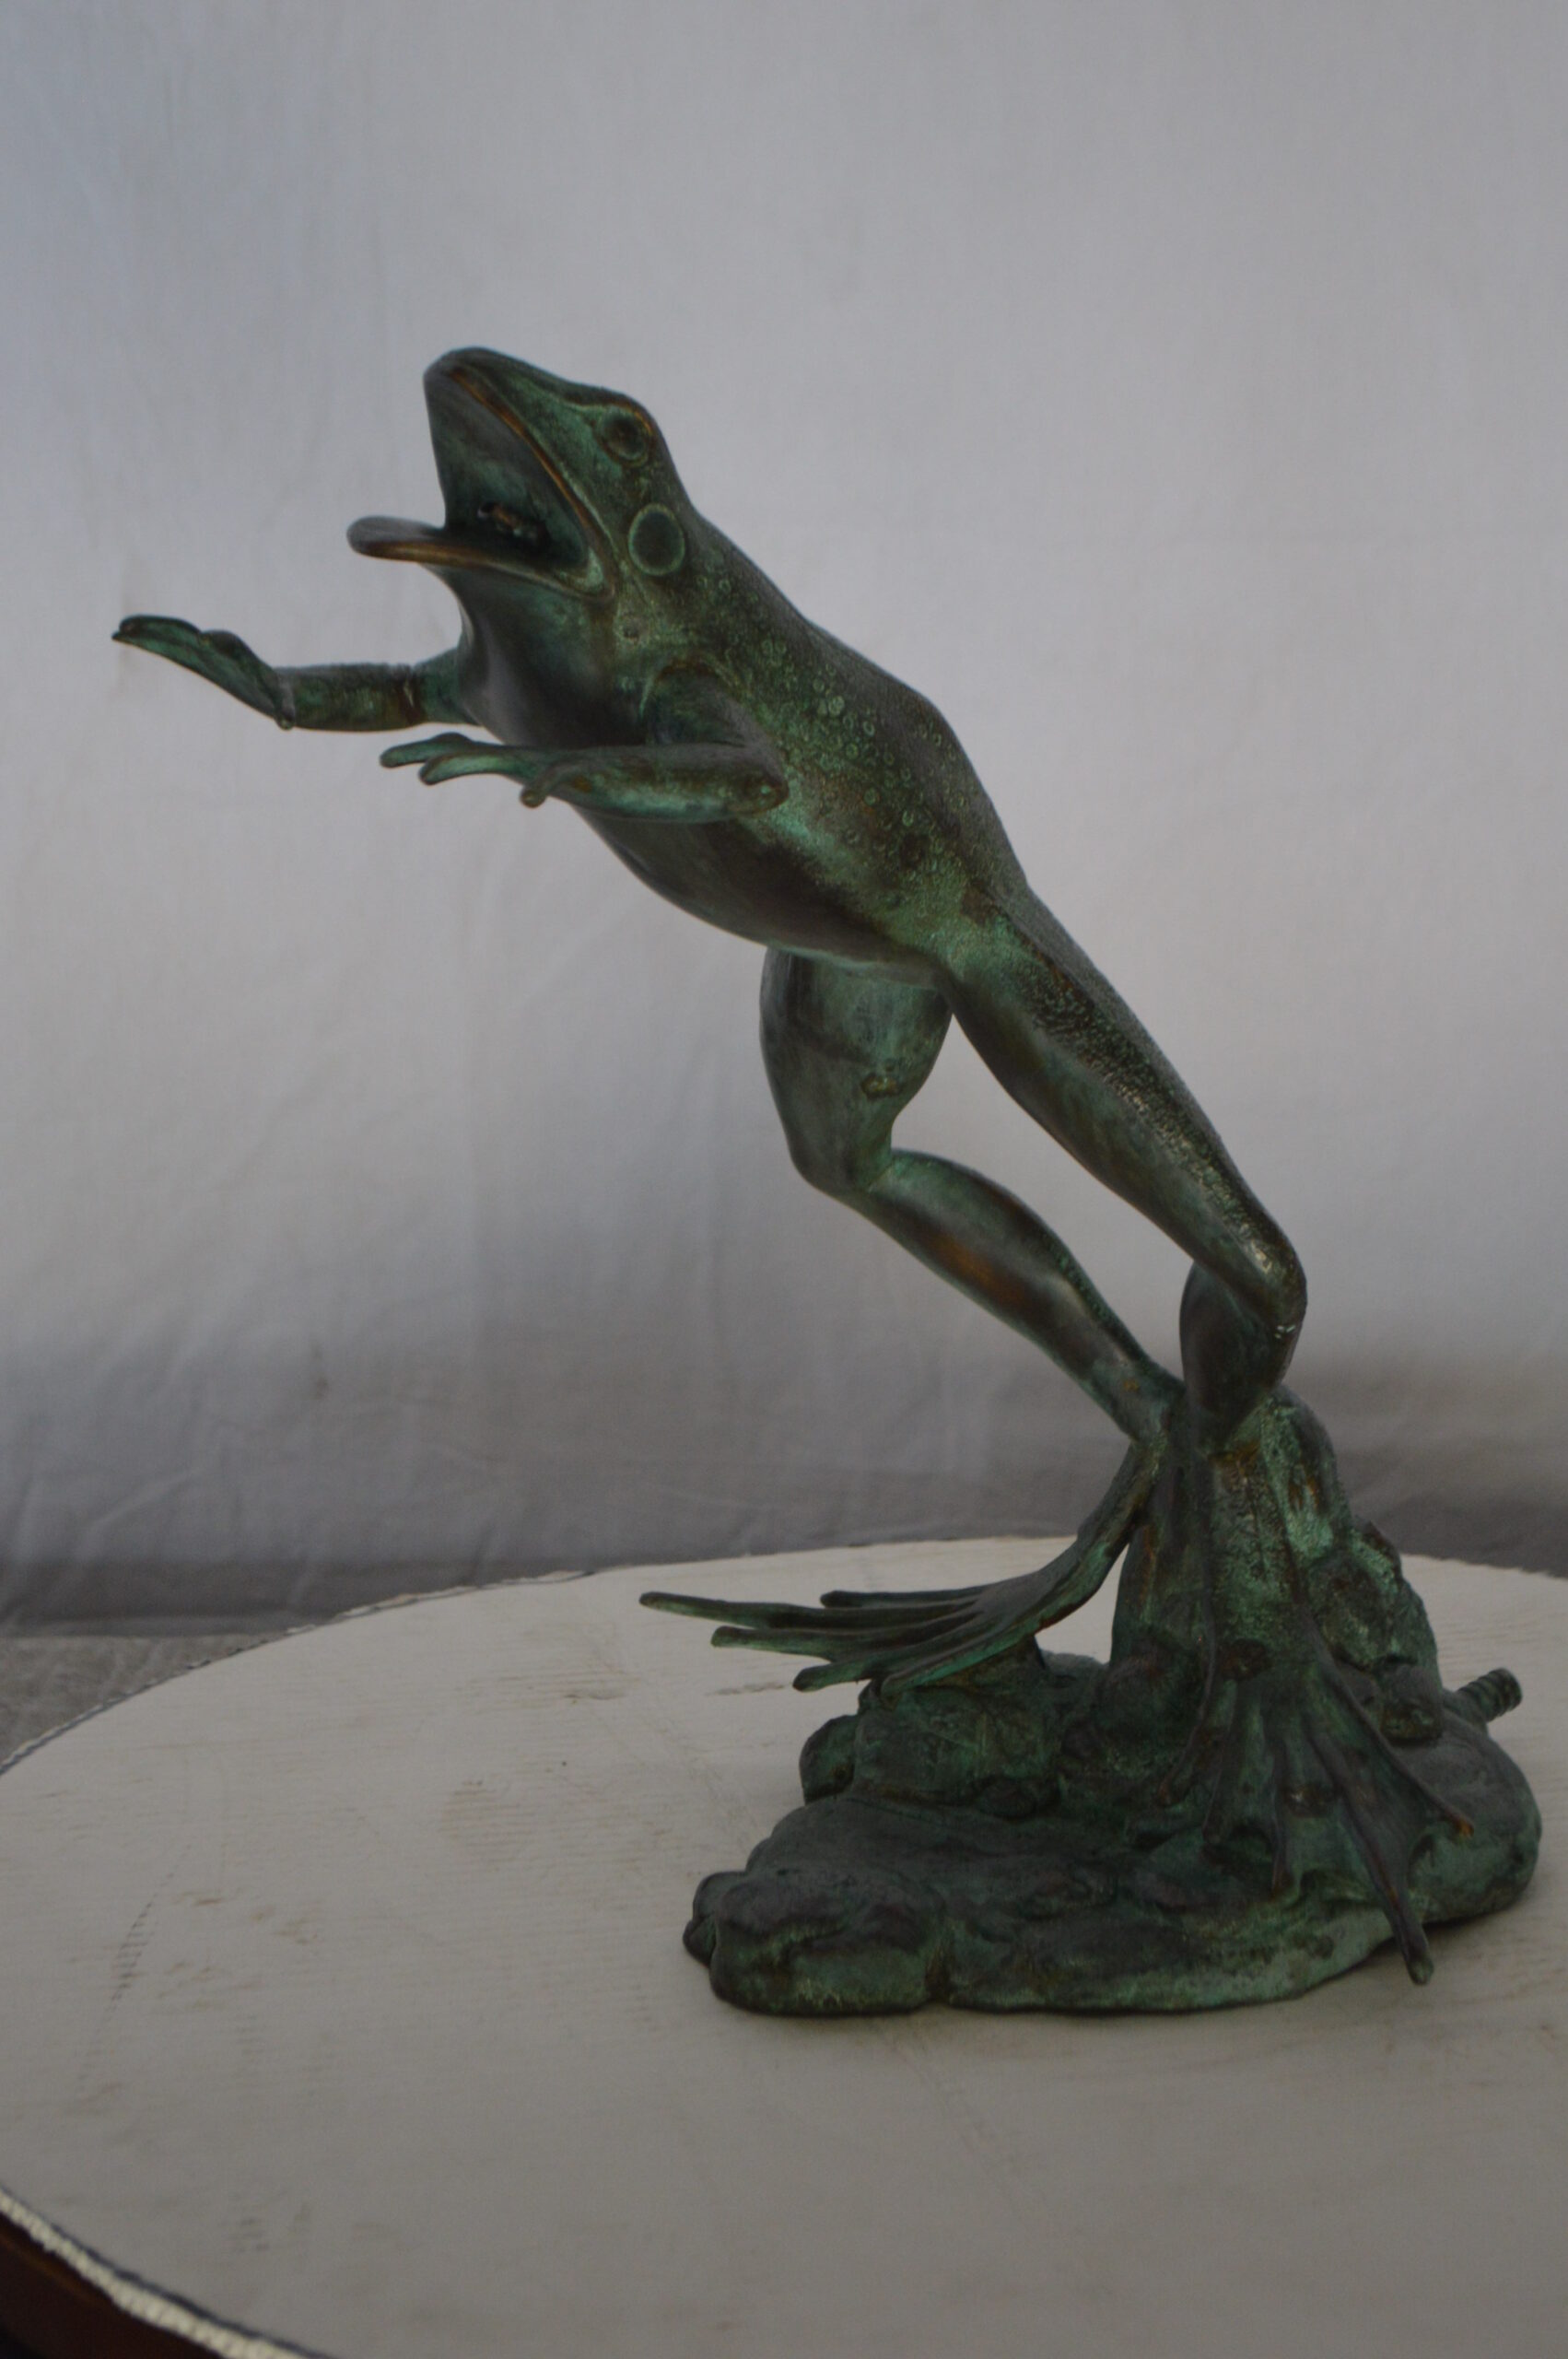 Frog Jumping Bronze Statue Fountain - Size: 11L x 13W x 16H. - NiFAO